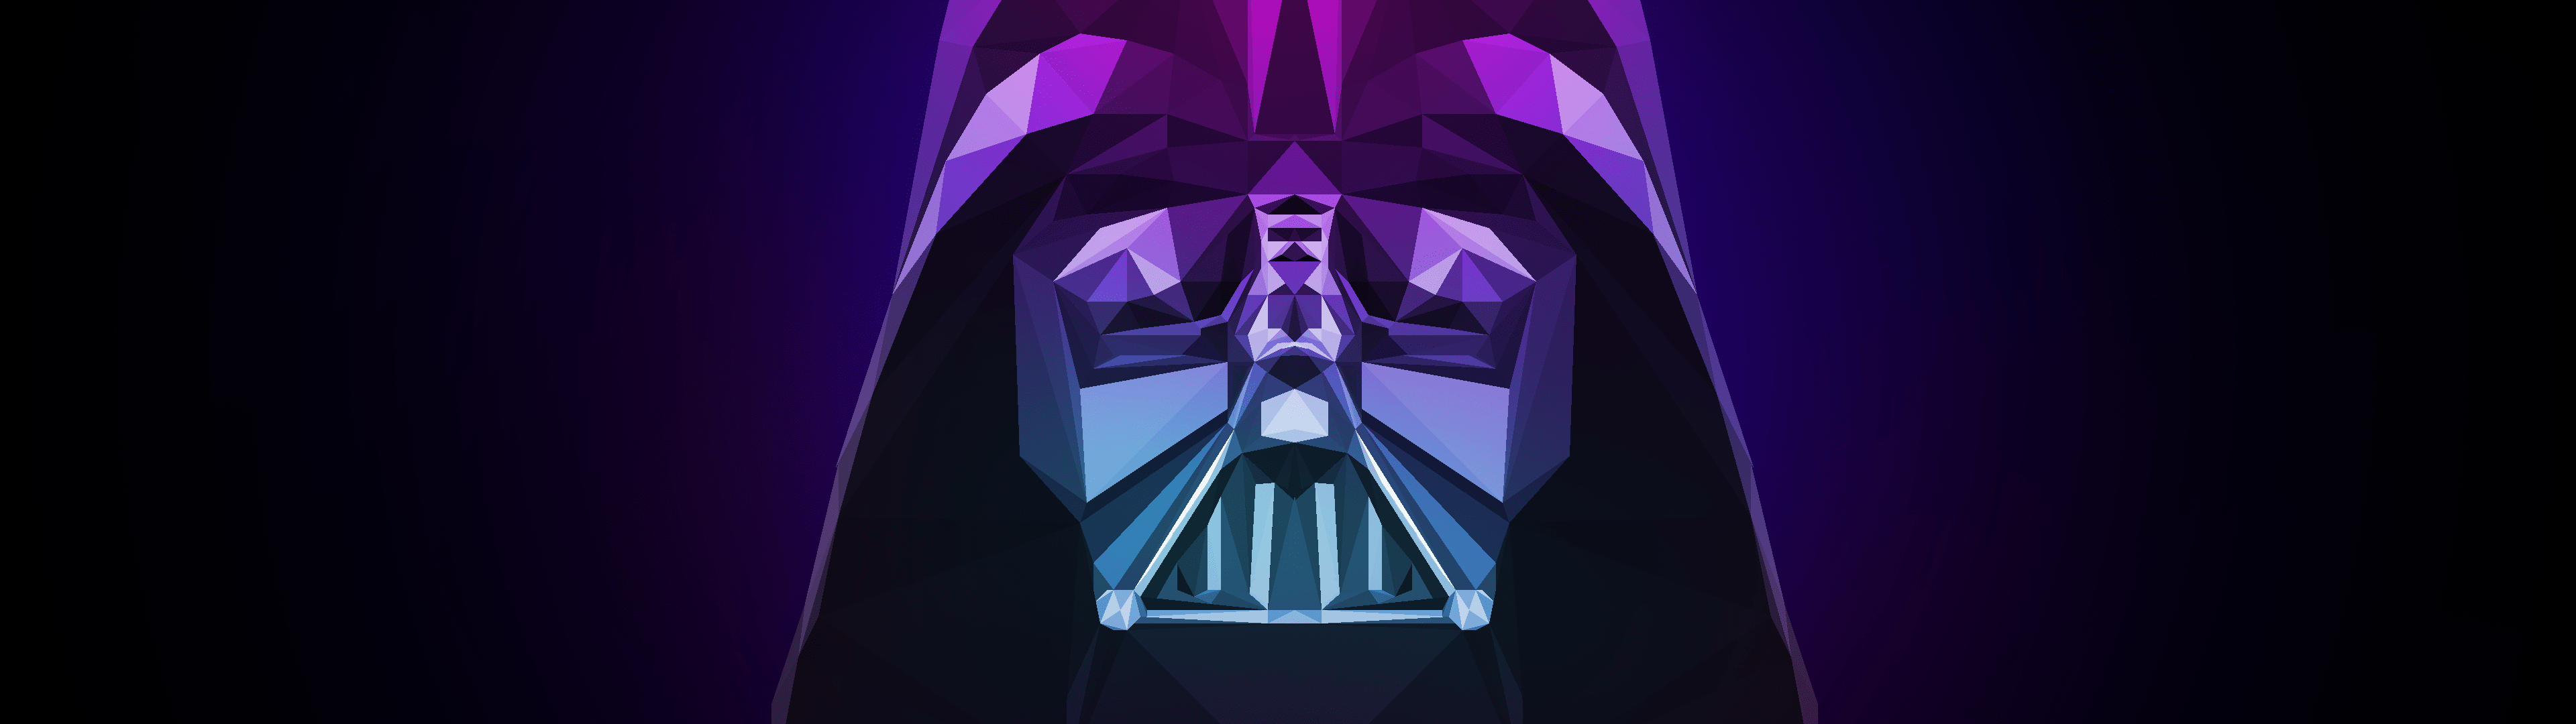 A purple and blue Darth Vader image with a dark background. - Low poly